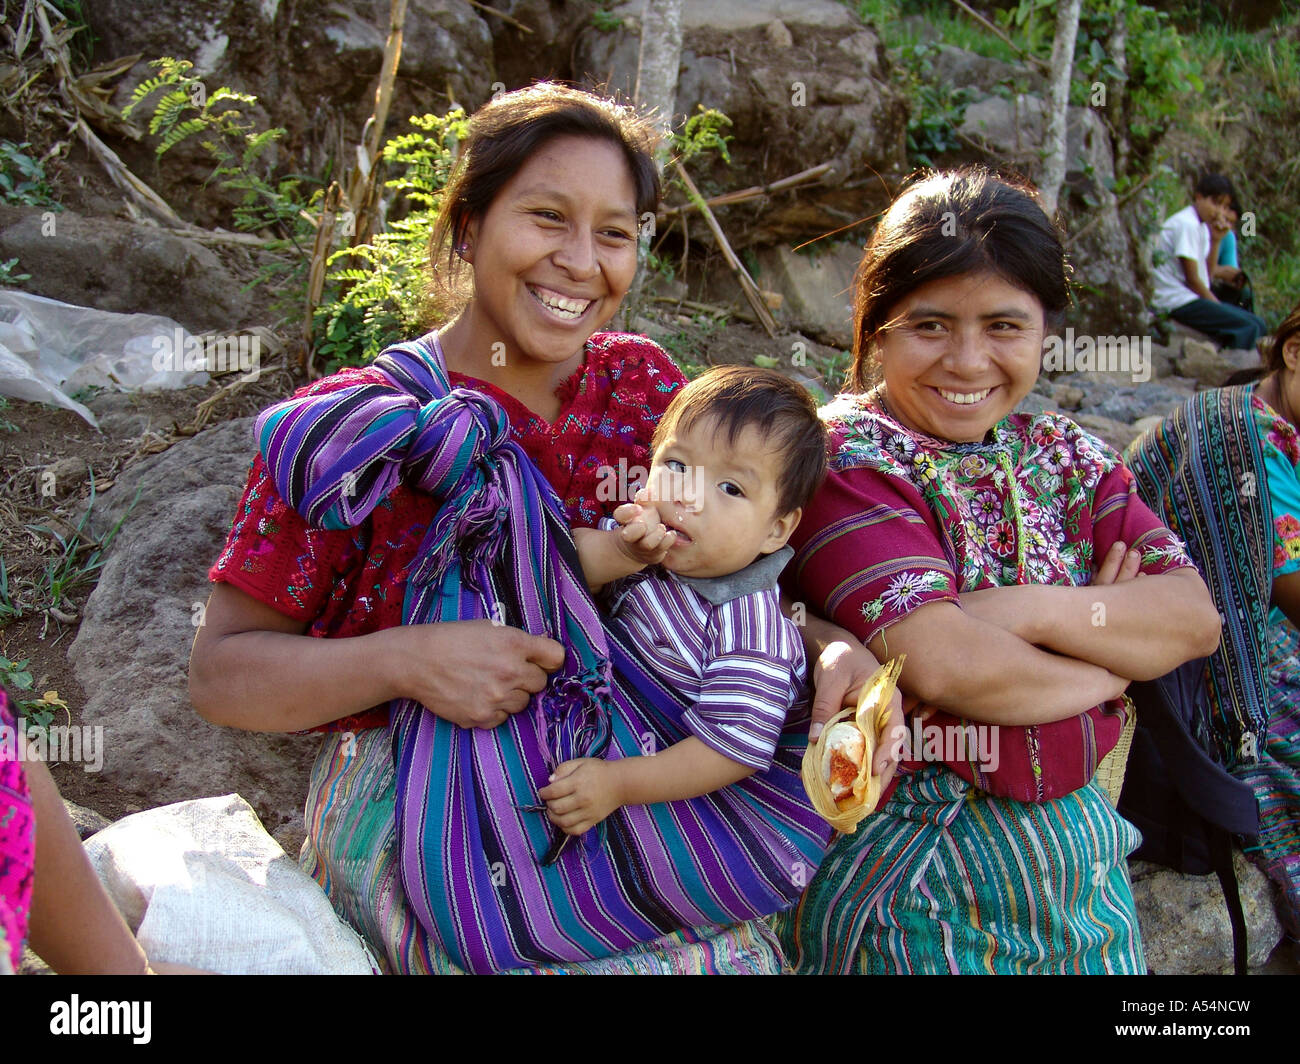 Painet ip1691 guatemala mayan women children san lucas toliman country developing nation less economically developed culture Stock Photo